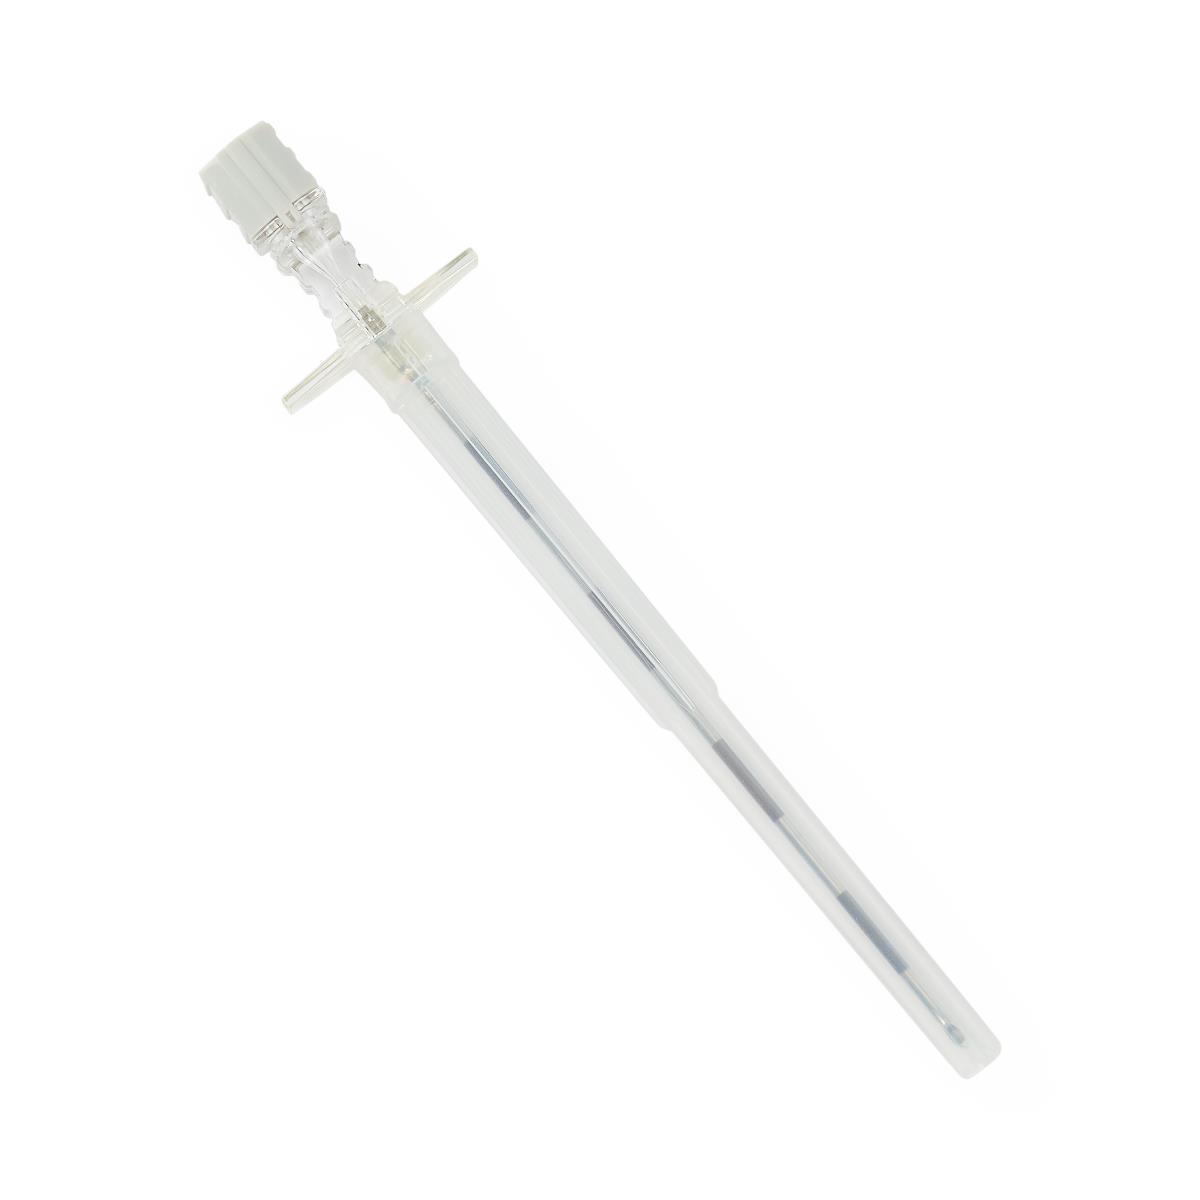 Non-Standard Needles Support Customized Metal or Plastic Needles